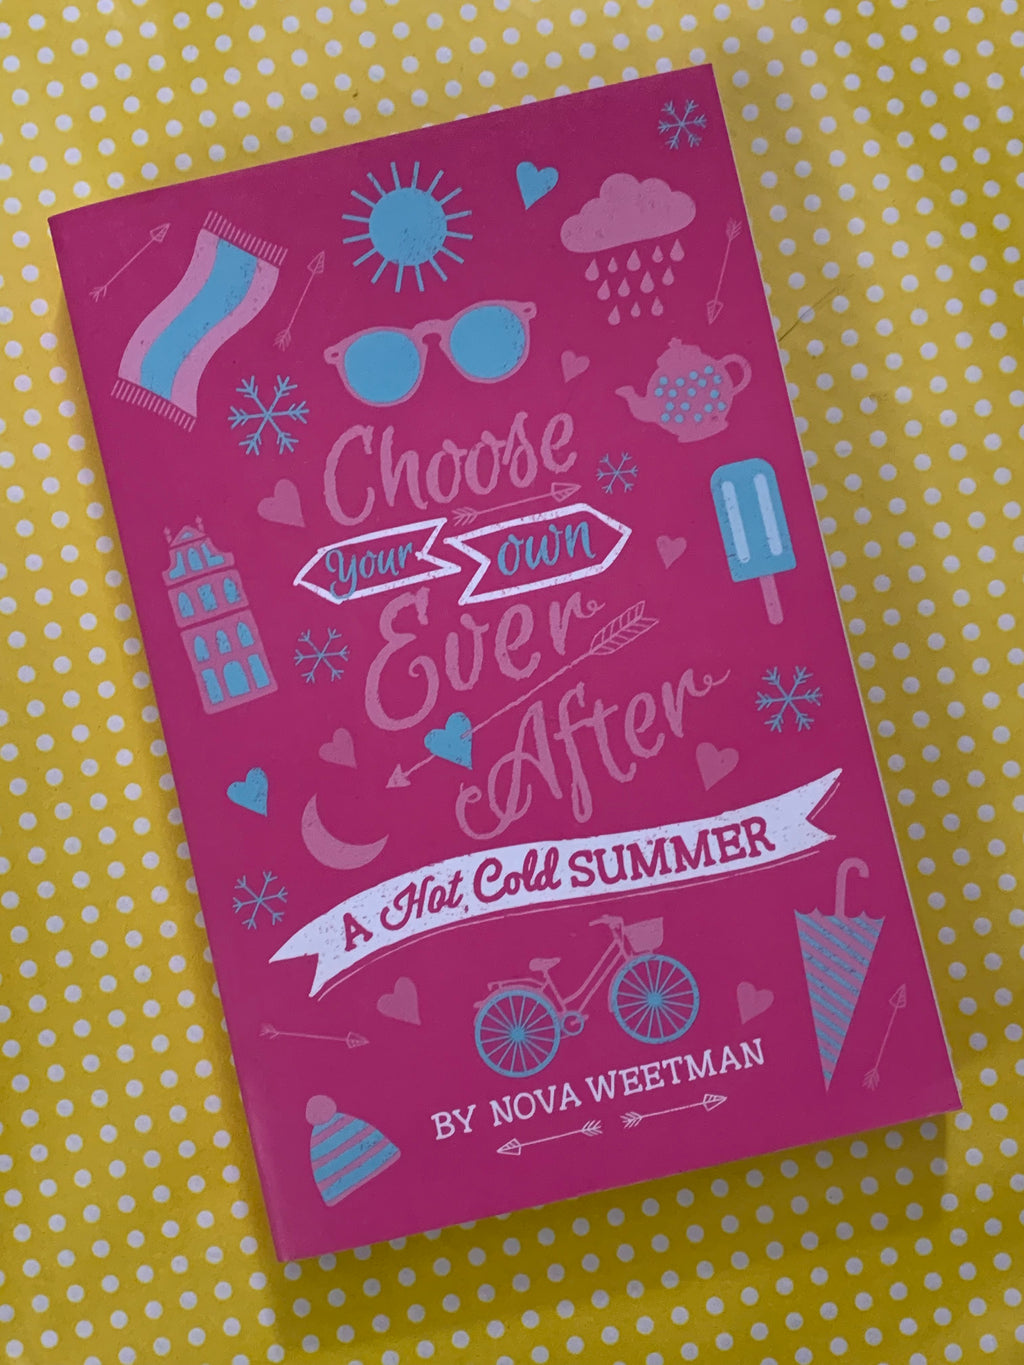 Choose Your Own Ever After: A Hot, Cold Summer- By Nova Weetman